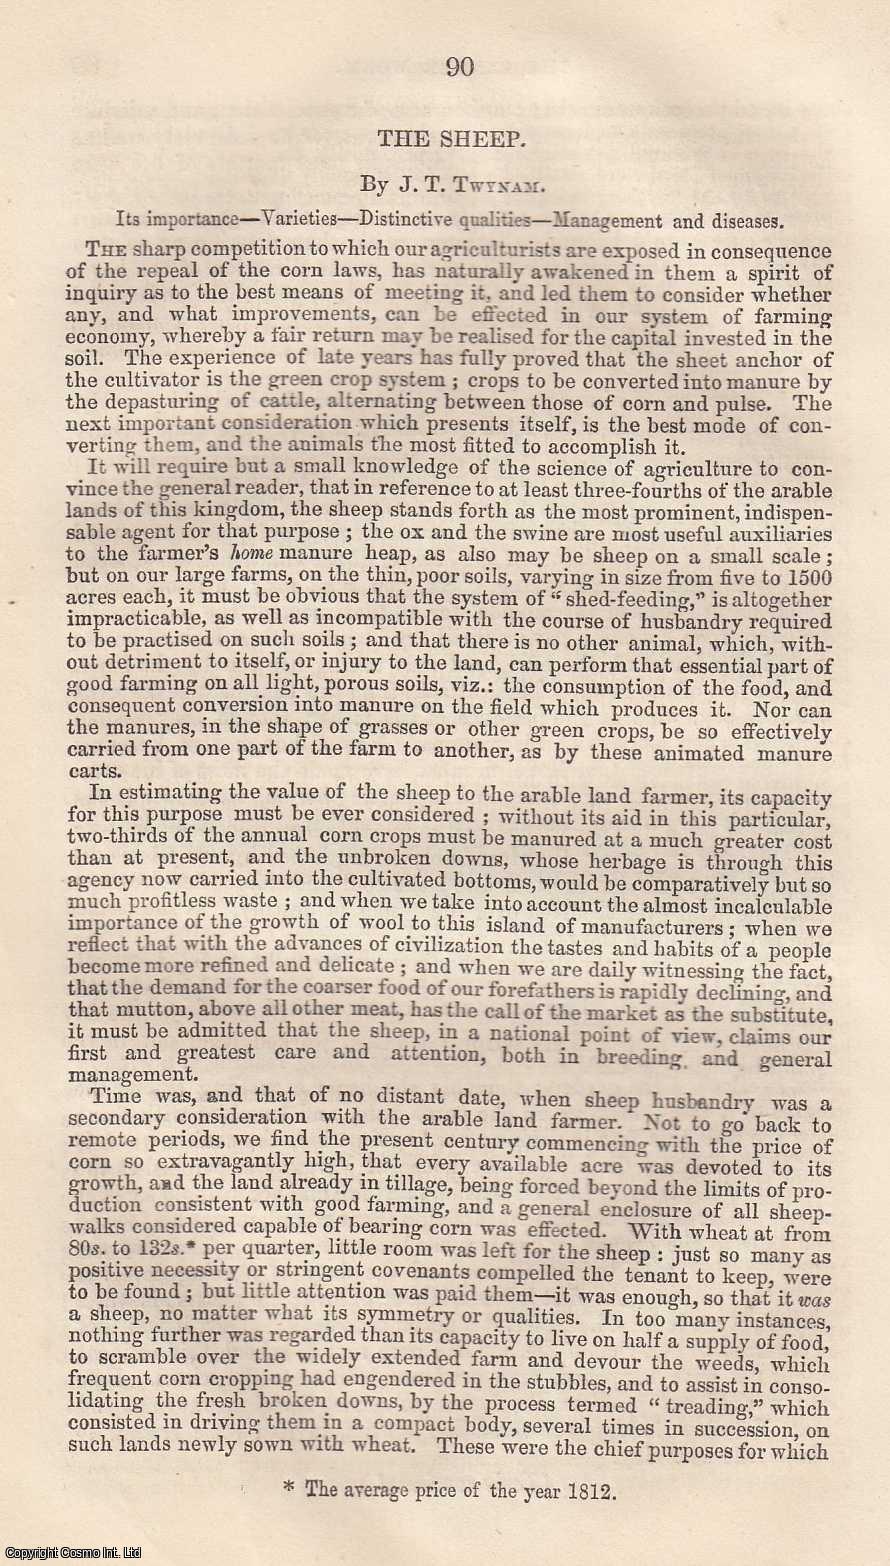 J.T. Twynam - The Sheep. Its importance, varieties, distinctive qualities, management and diseases. An original article from The British Journal, 1852.